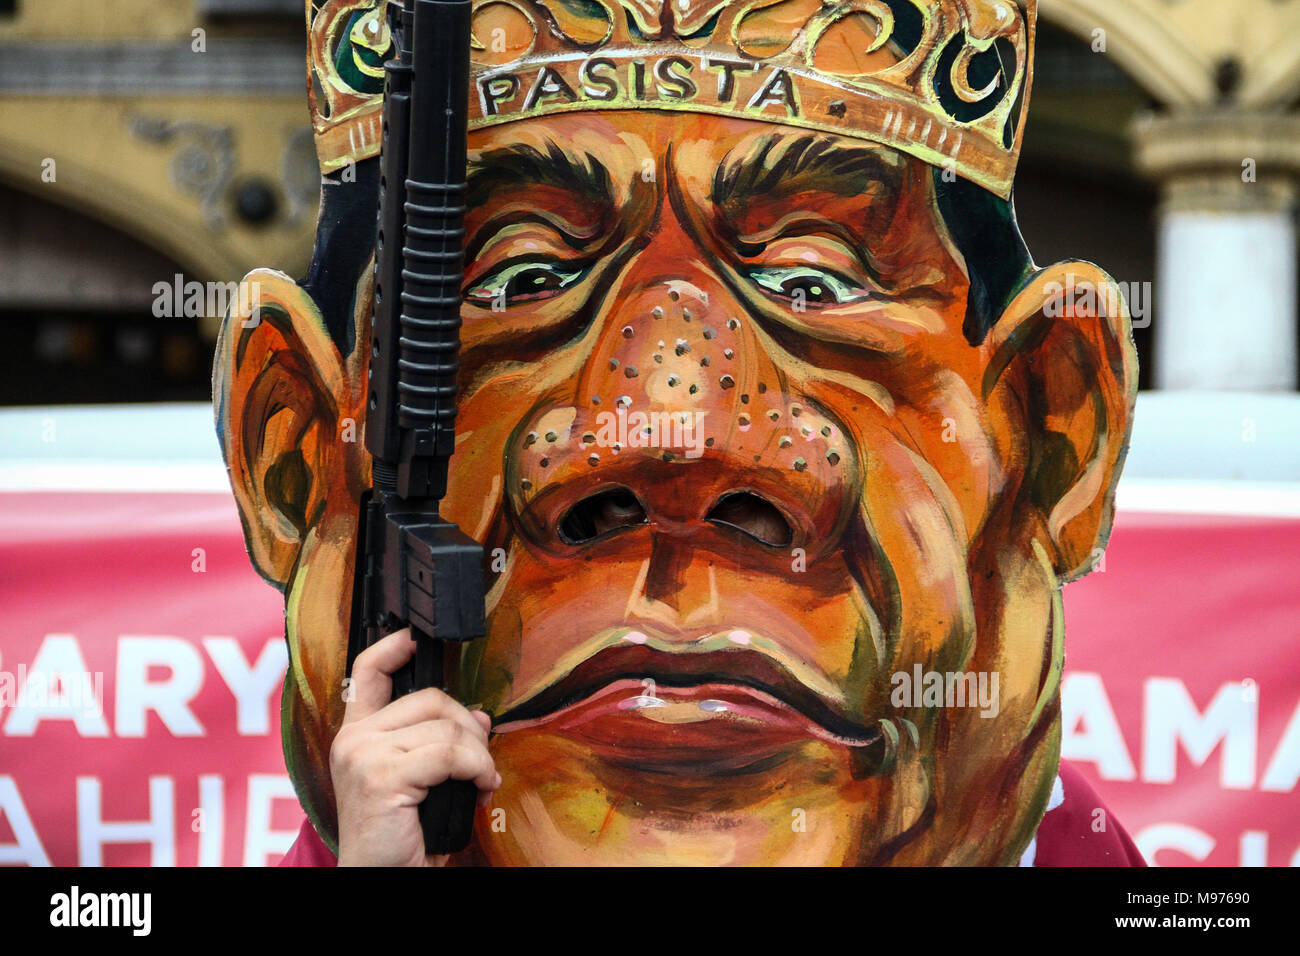 Manila, Philippines. 23rd March, 2018. A protester wearing a President Duterte mask holds a toy rifle in Plaza Miranda, Manila. Activists slammed Duterte for the alleged double standard in his war on drugs, the crackdown on activists, and the recent designation of activists as terrorists according to the Malacanang. The March was held a few days before the Holy Week, with protesters carrying a cross to Mendiola, Manila. Credit: SOPA Images Limited/Alamy Live News Stock Photo